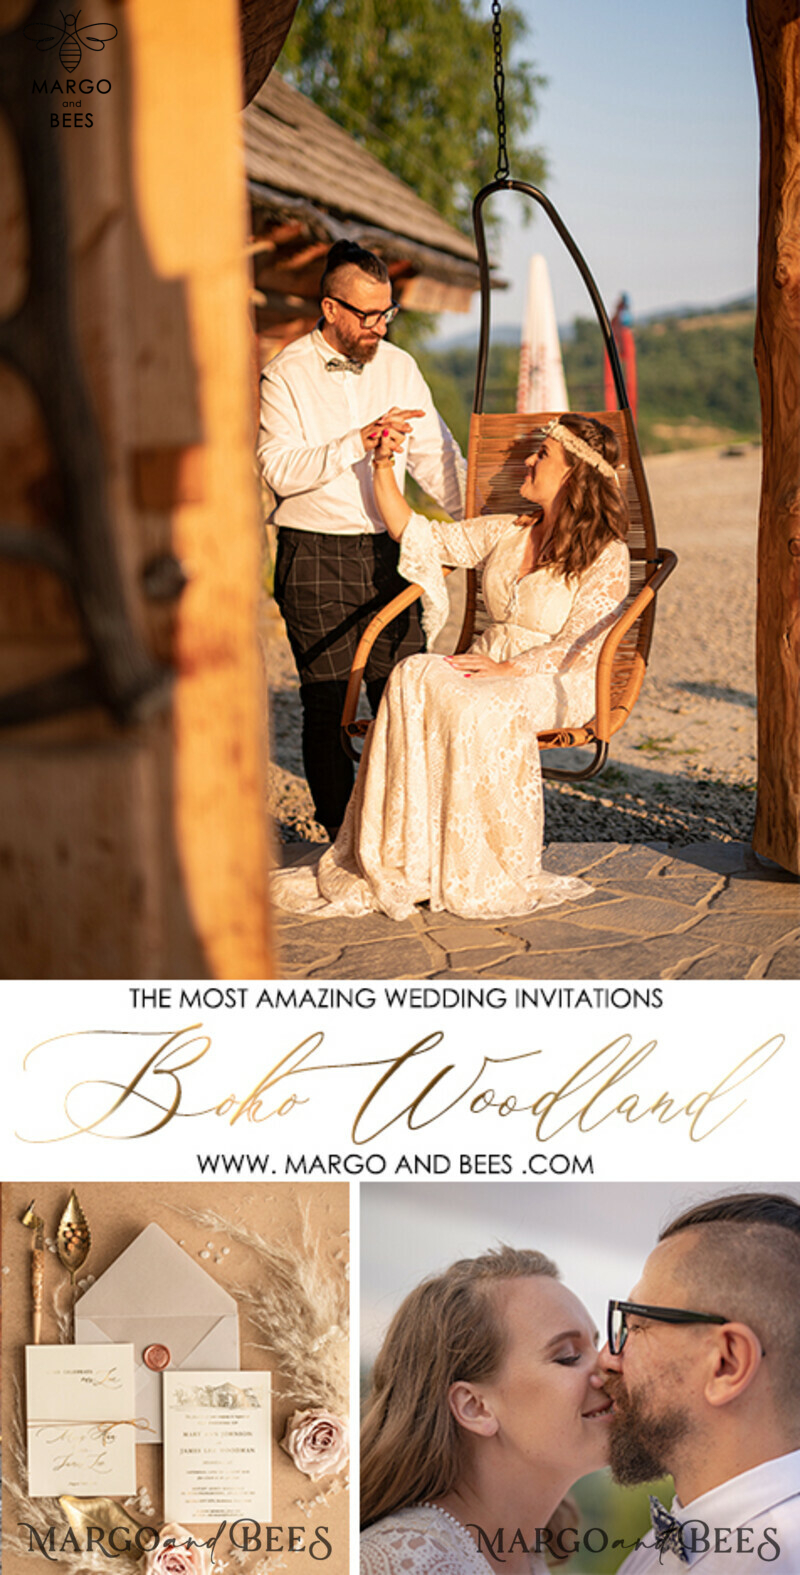 Luxury Bohemian Wedding Invitations: Customized Venue Sketch and Elegant Nude Invitation Suite with Golden Shine-8